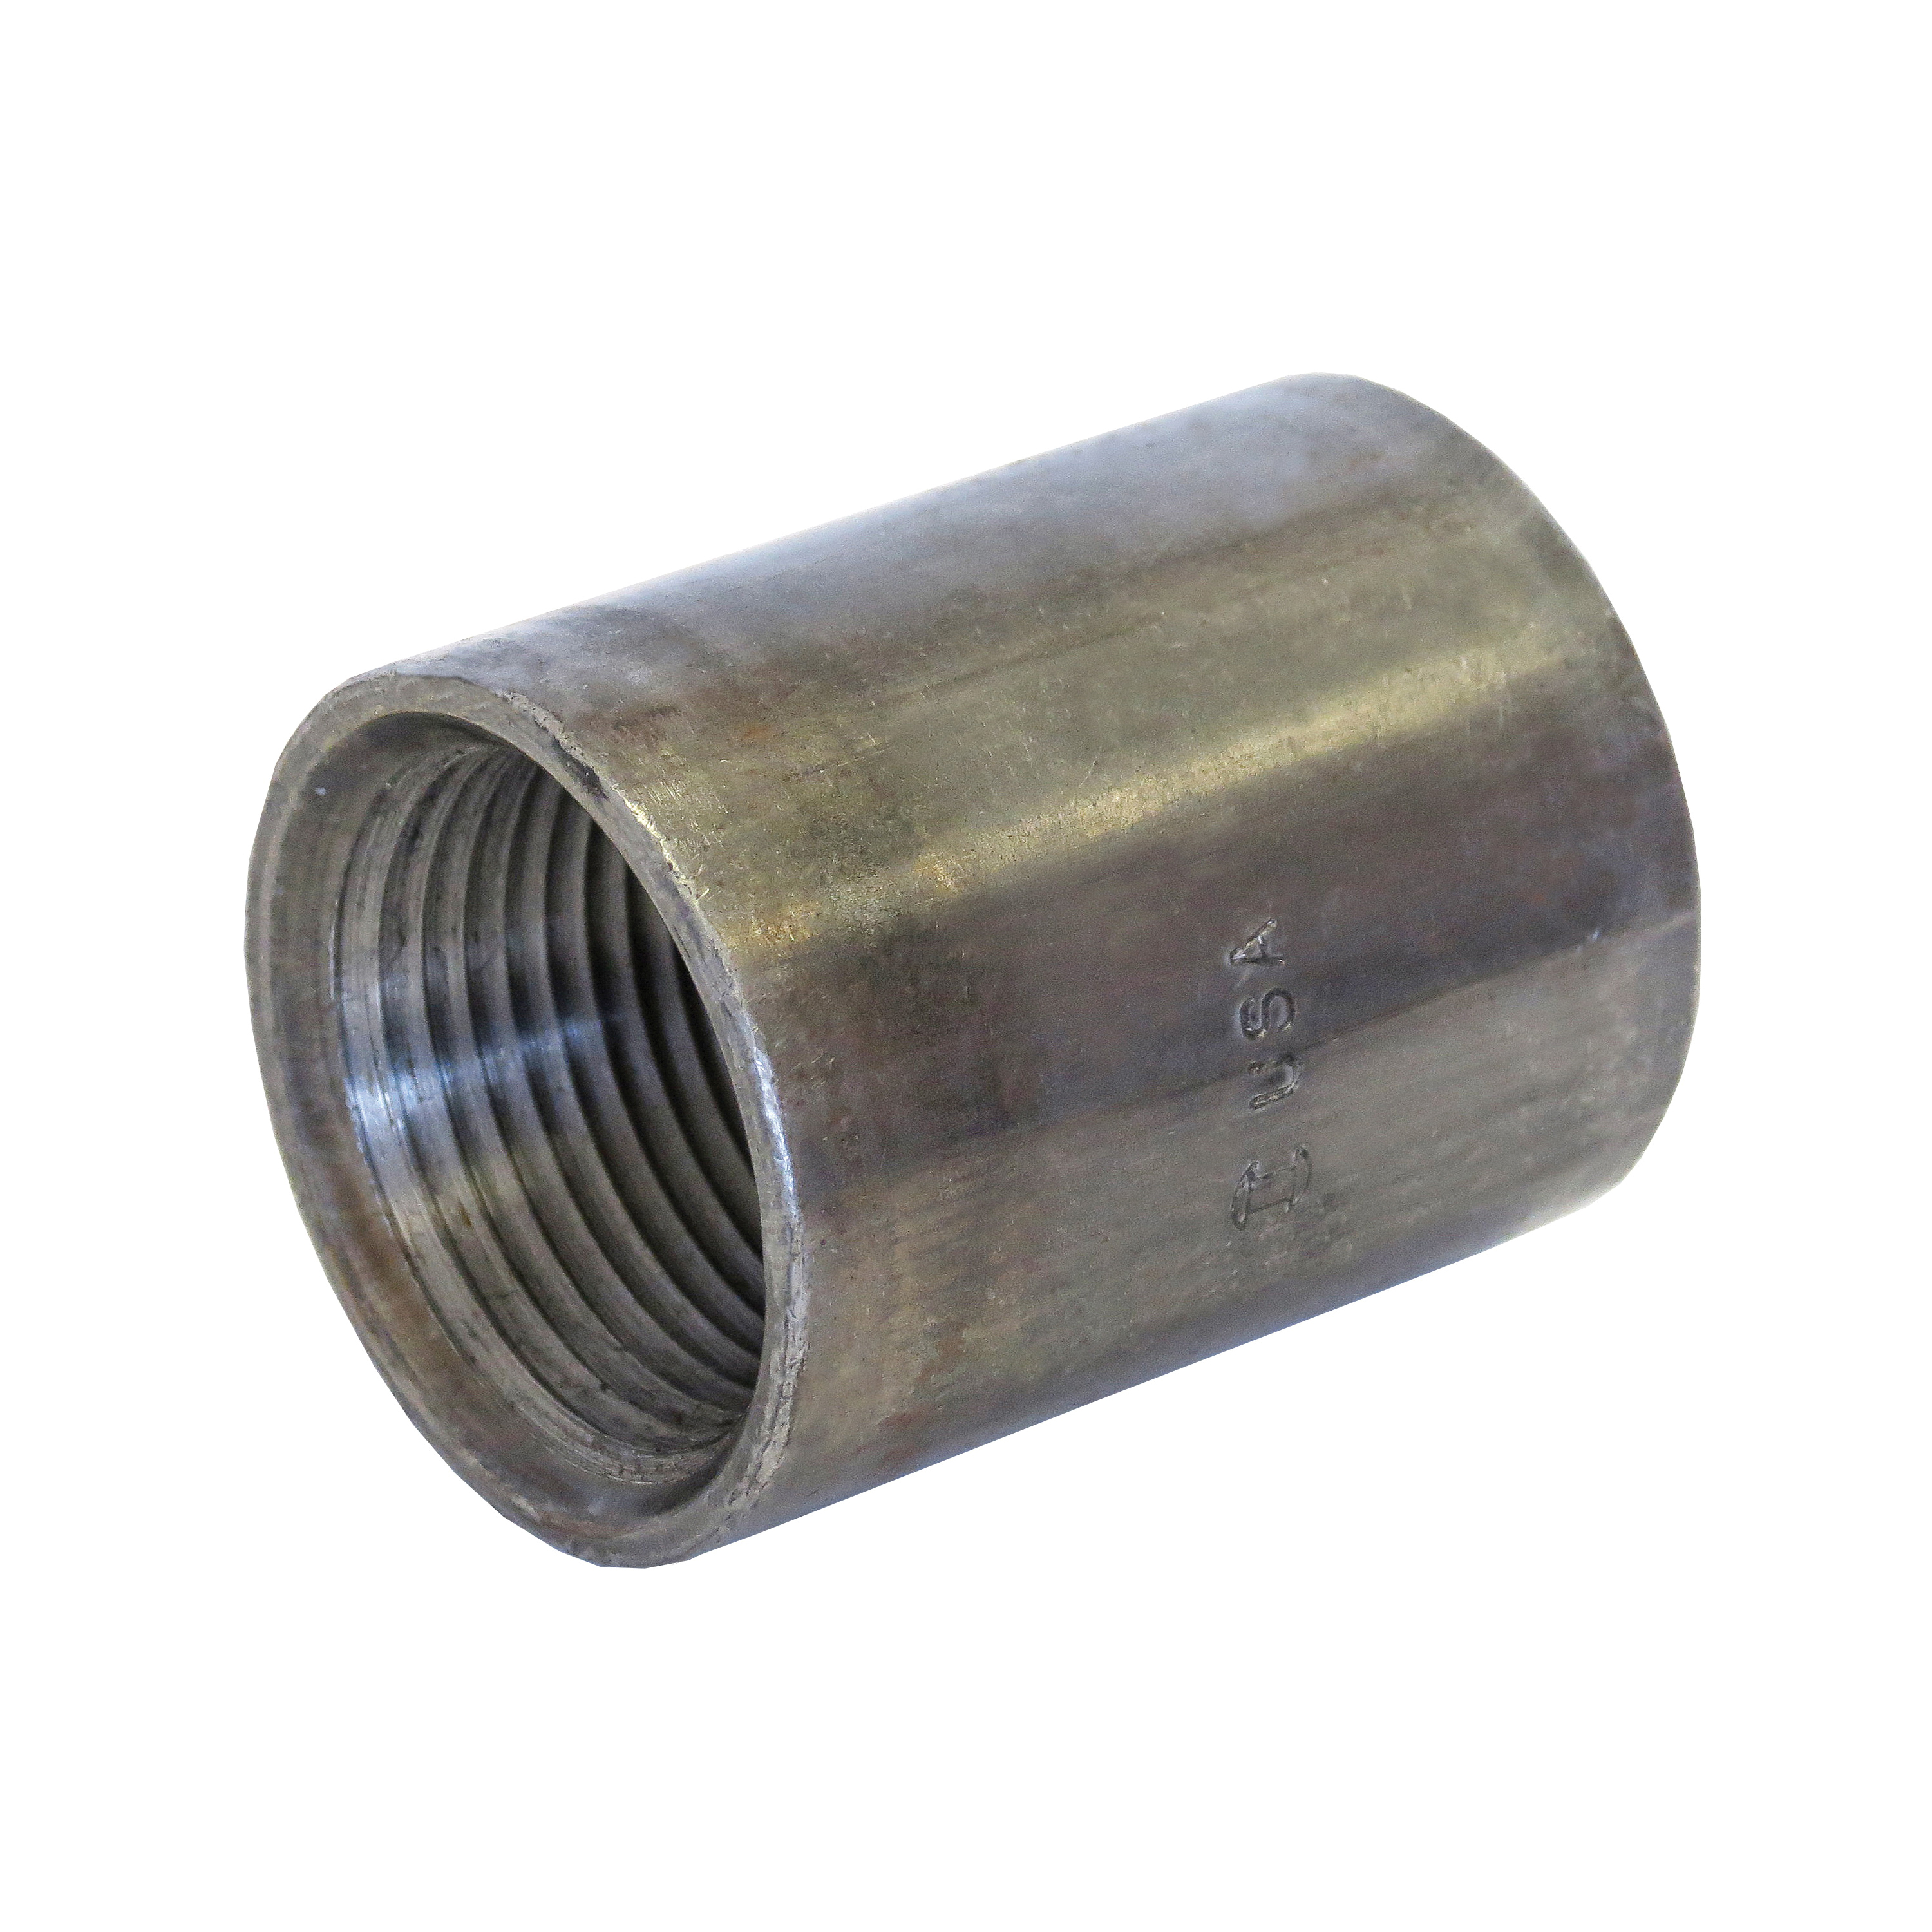 Beck® 0321200008 FIG 336 Standard Pipe Coupling, Steel, 1/8 in Nominal, SCH 40/STD, FNPT End Style, Galvanized, Domestic